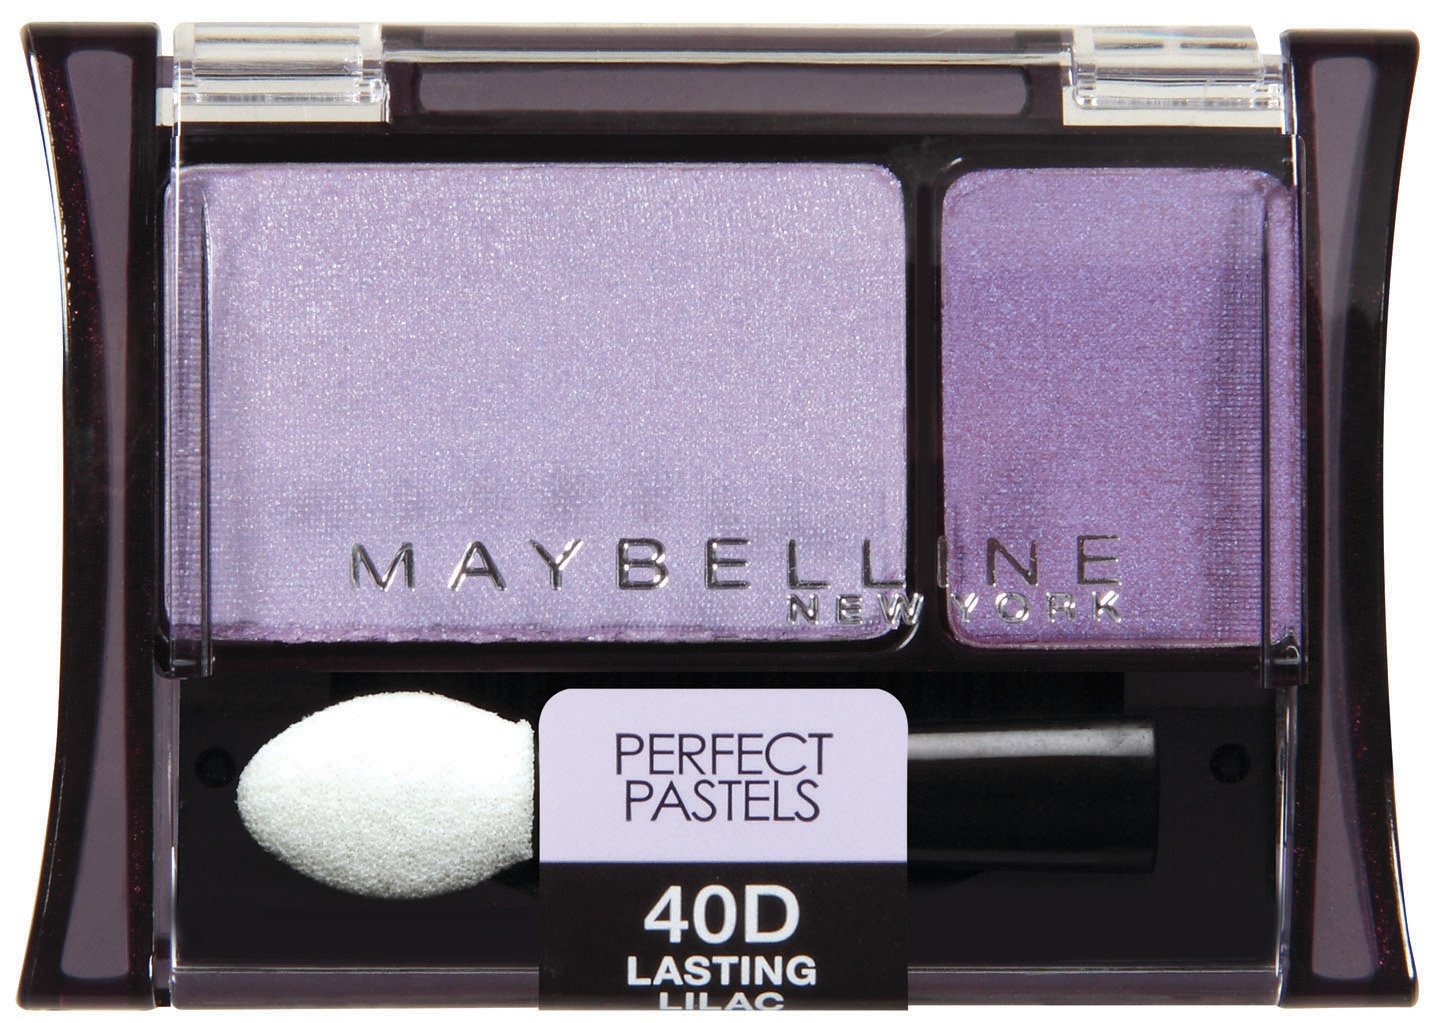 Maybelline New York Expert Wear Eyeshadow Duos, 40D Lasting Lilac Perfect Pastels, 0.08 Ounce 